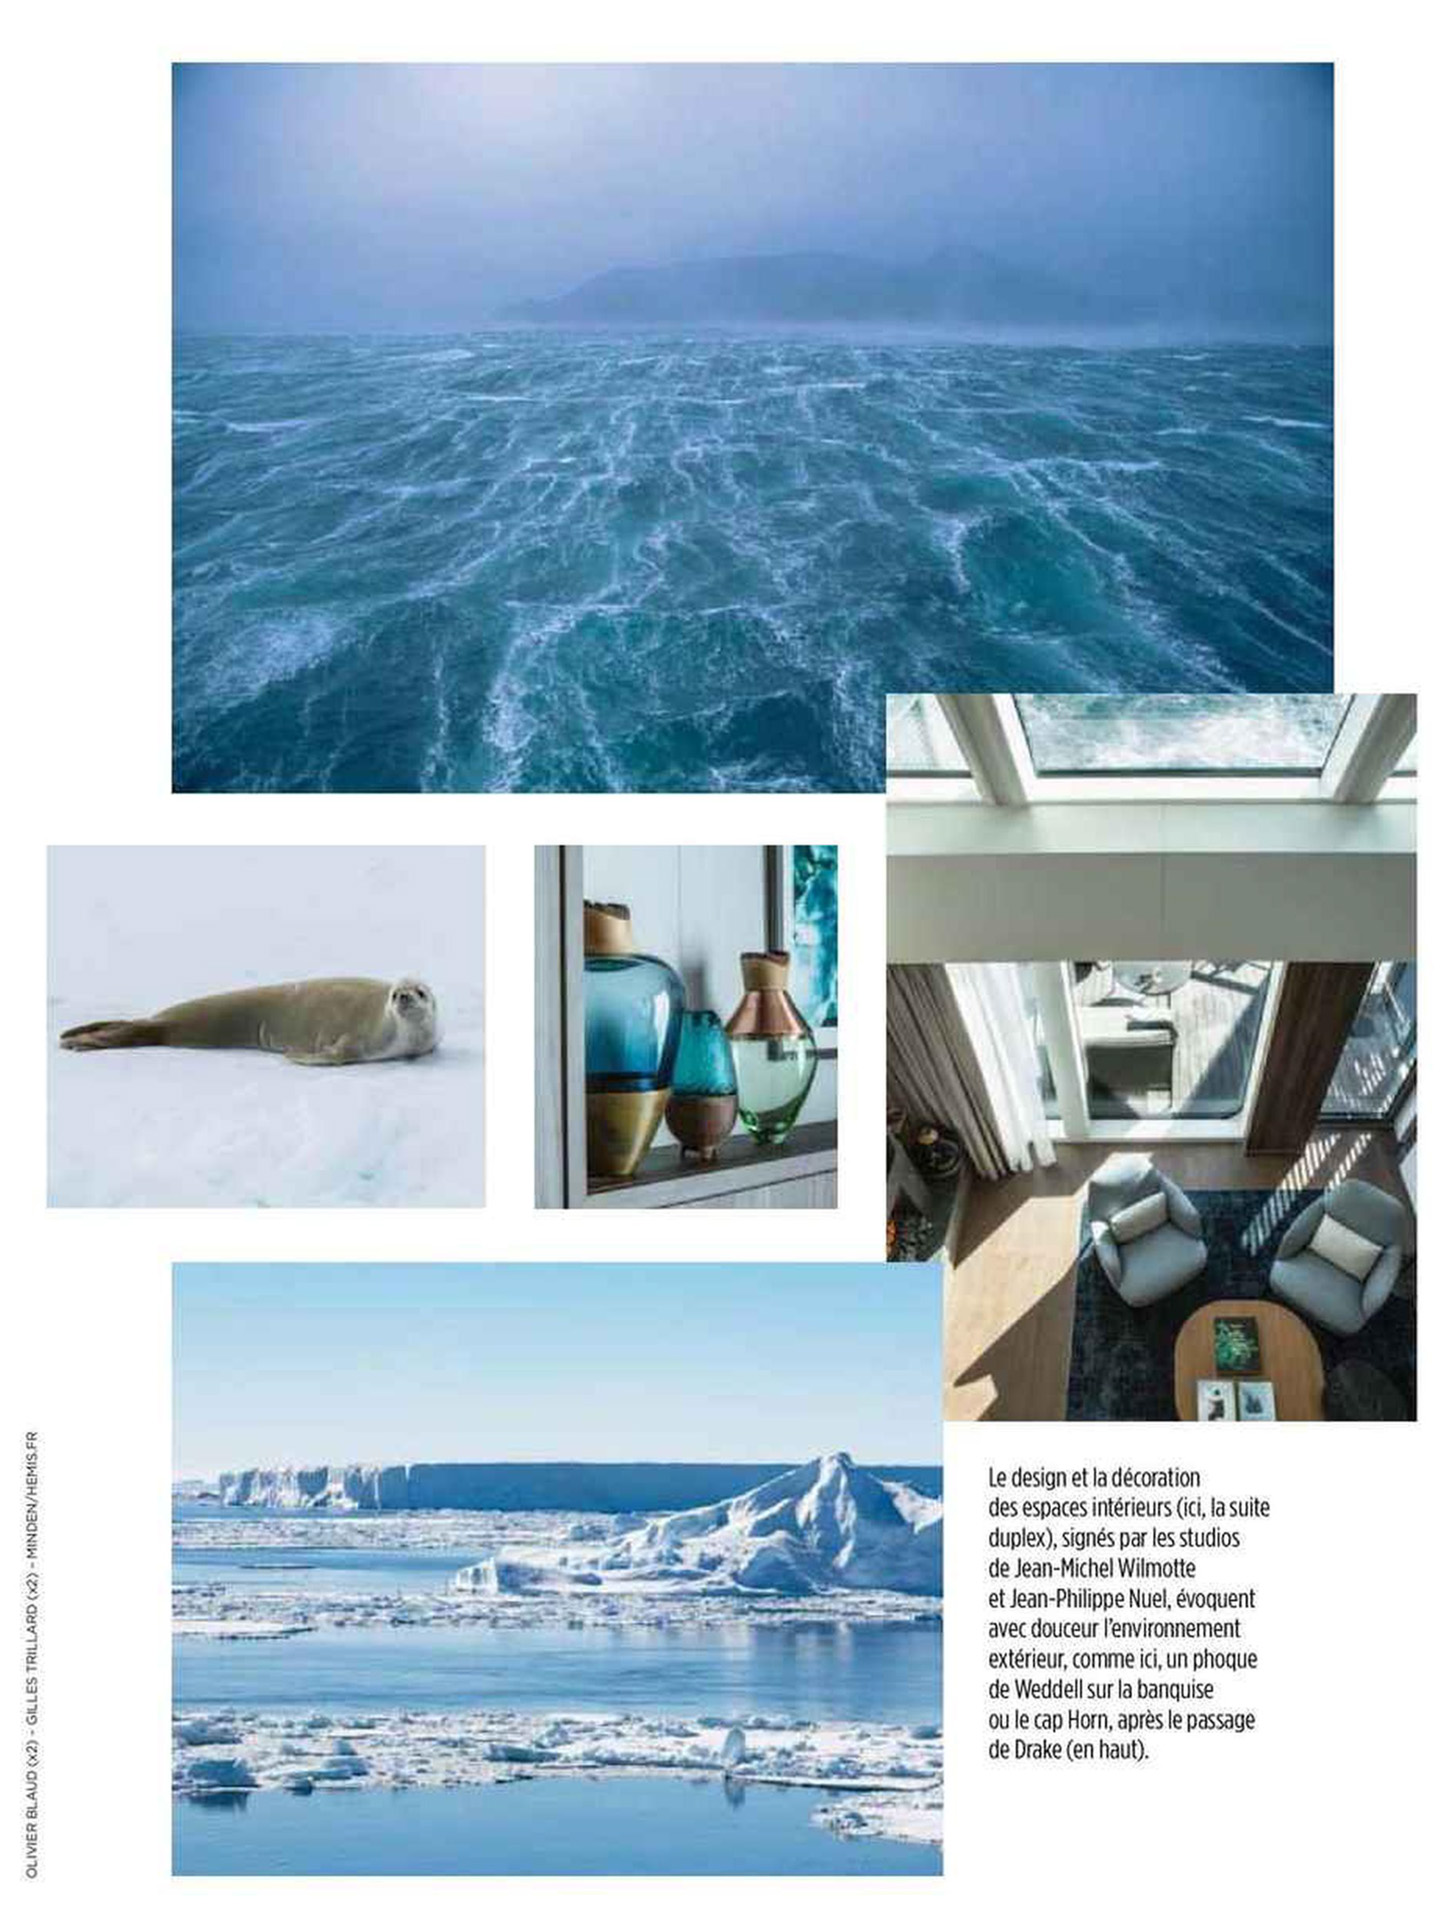 article on commander charcot of ponant in le Point, interior design by jean-philippe nuel, luxury polar expedition ship, cruise, luxury ship, interior design